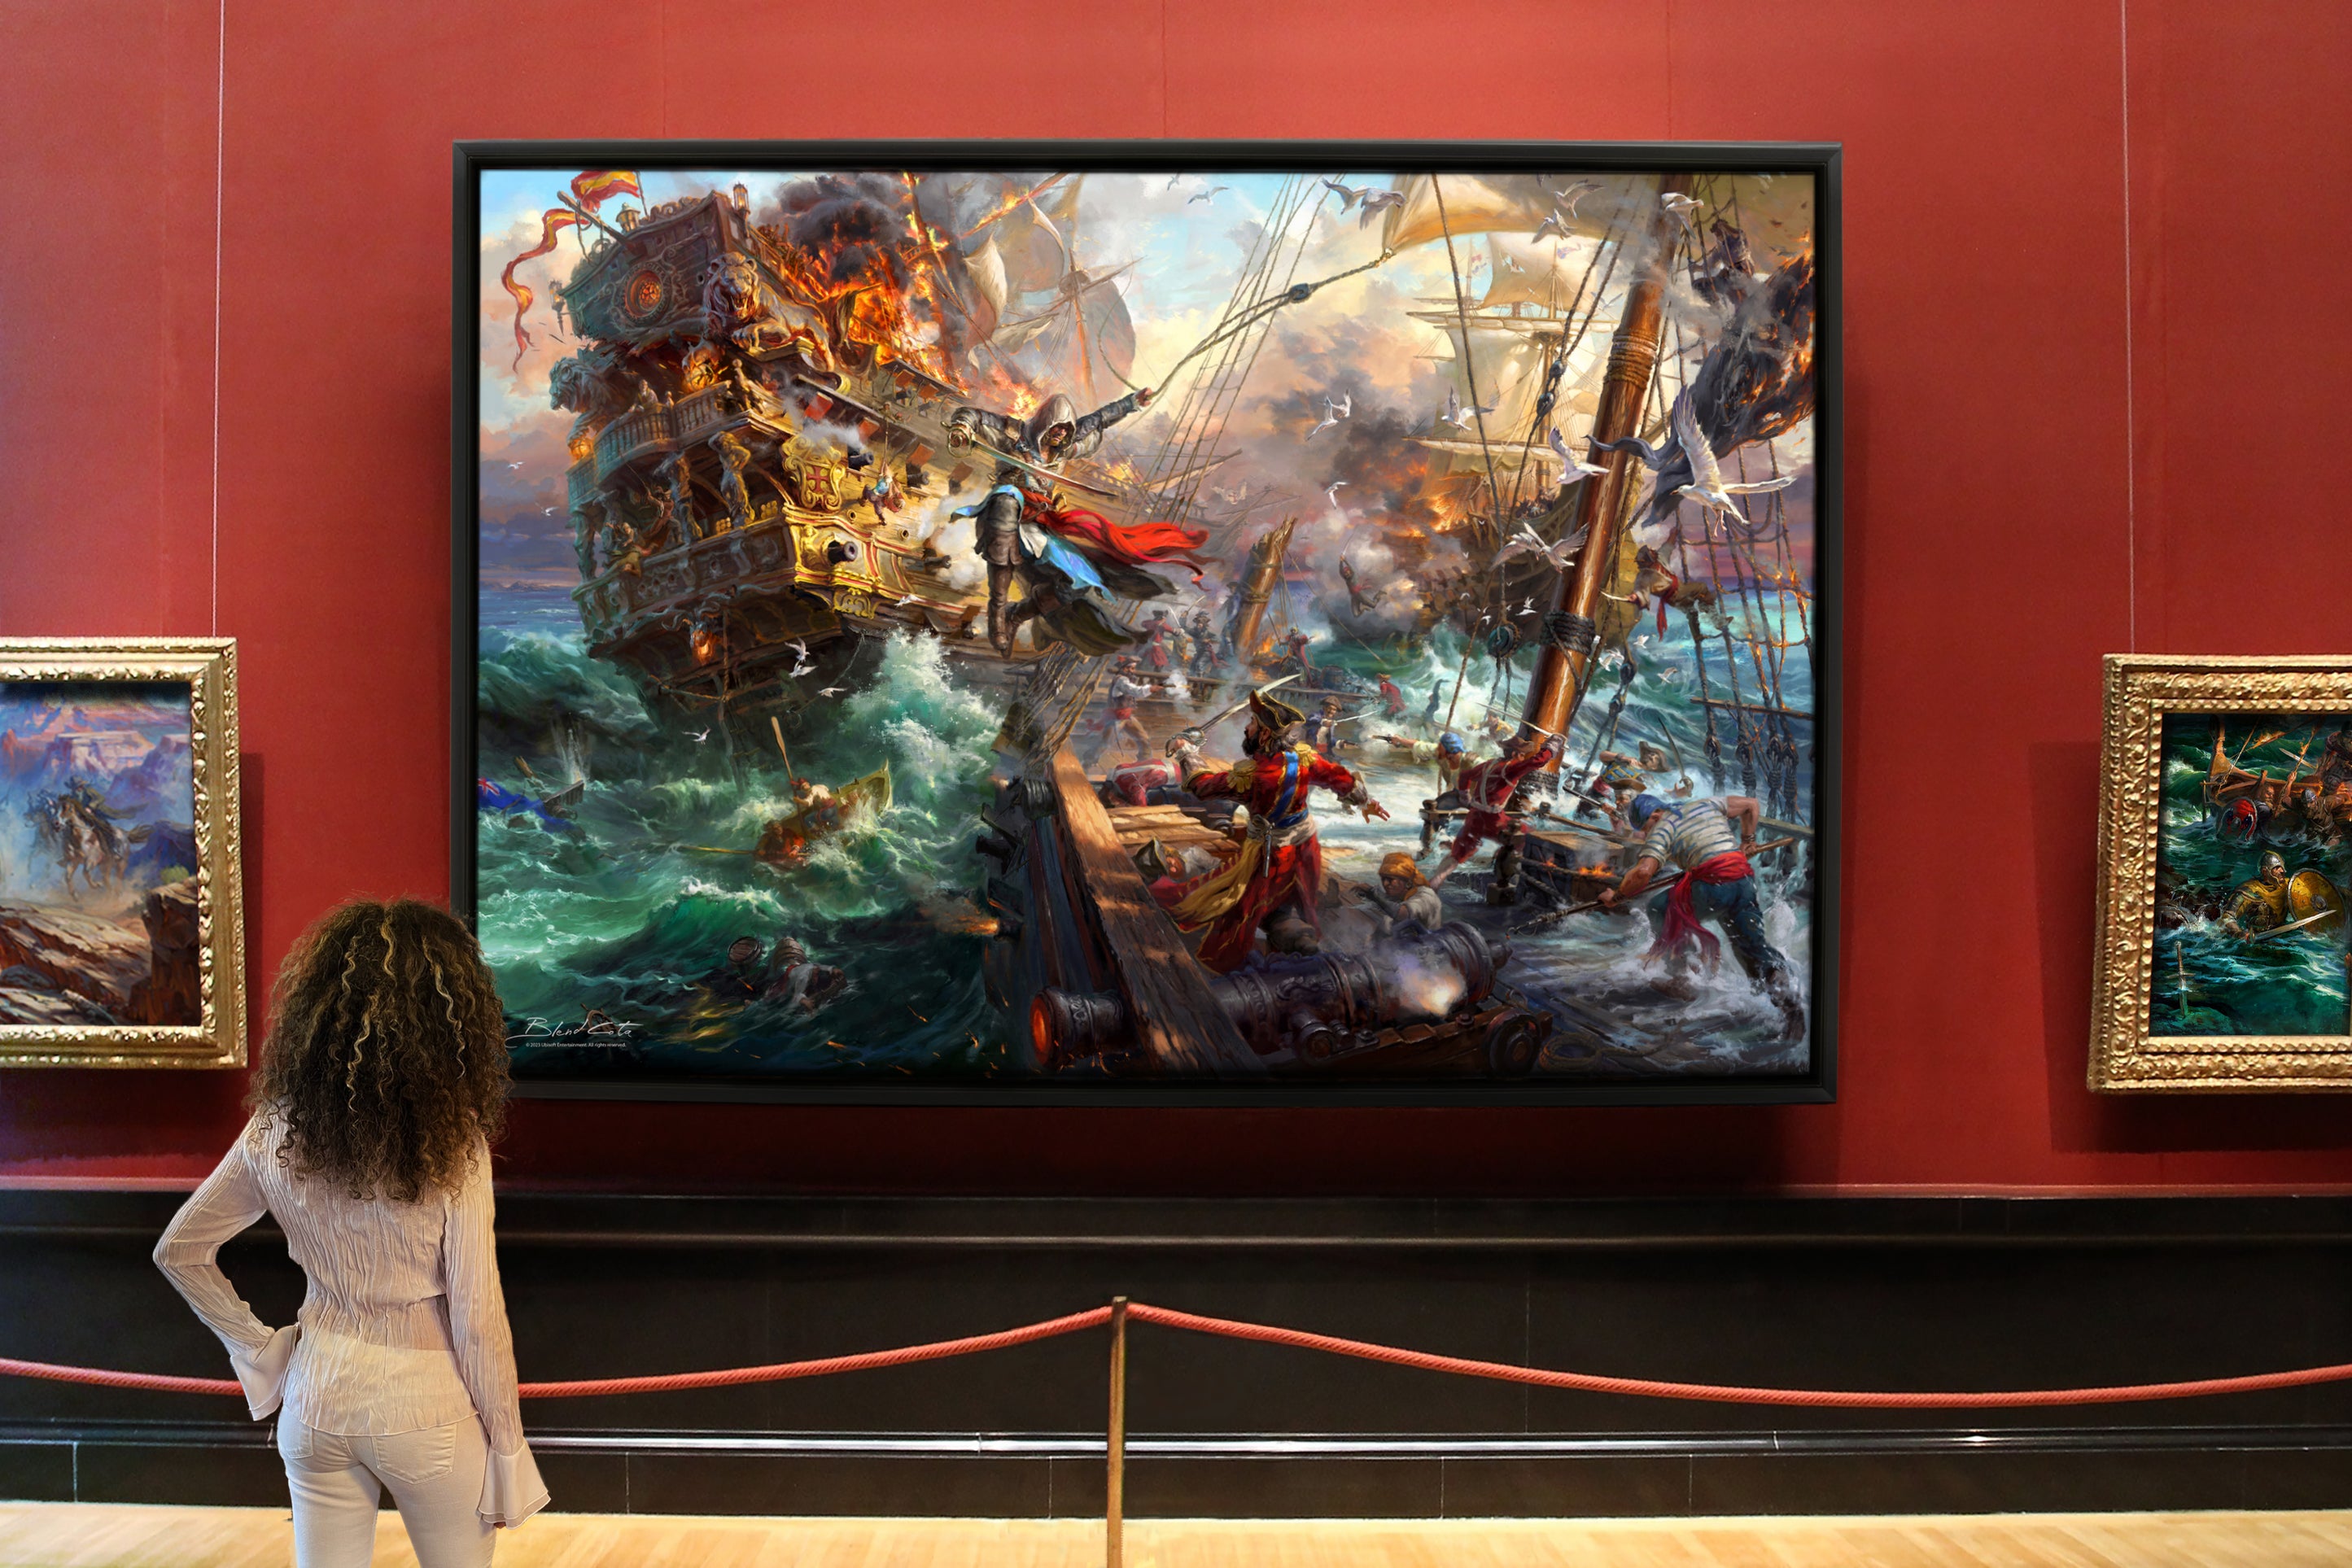 A naval battle at sea from Ubisoft's Assassin's Creed IV Black Flag with Edward Kenway and Bartholomew Roberts fighting on deck in this painting in a black frame in an art gallery setting.